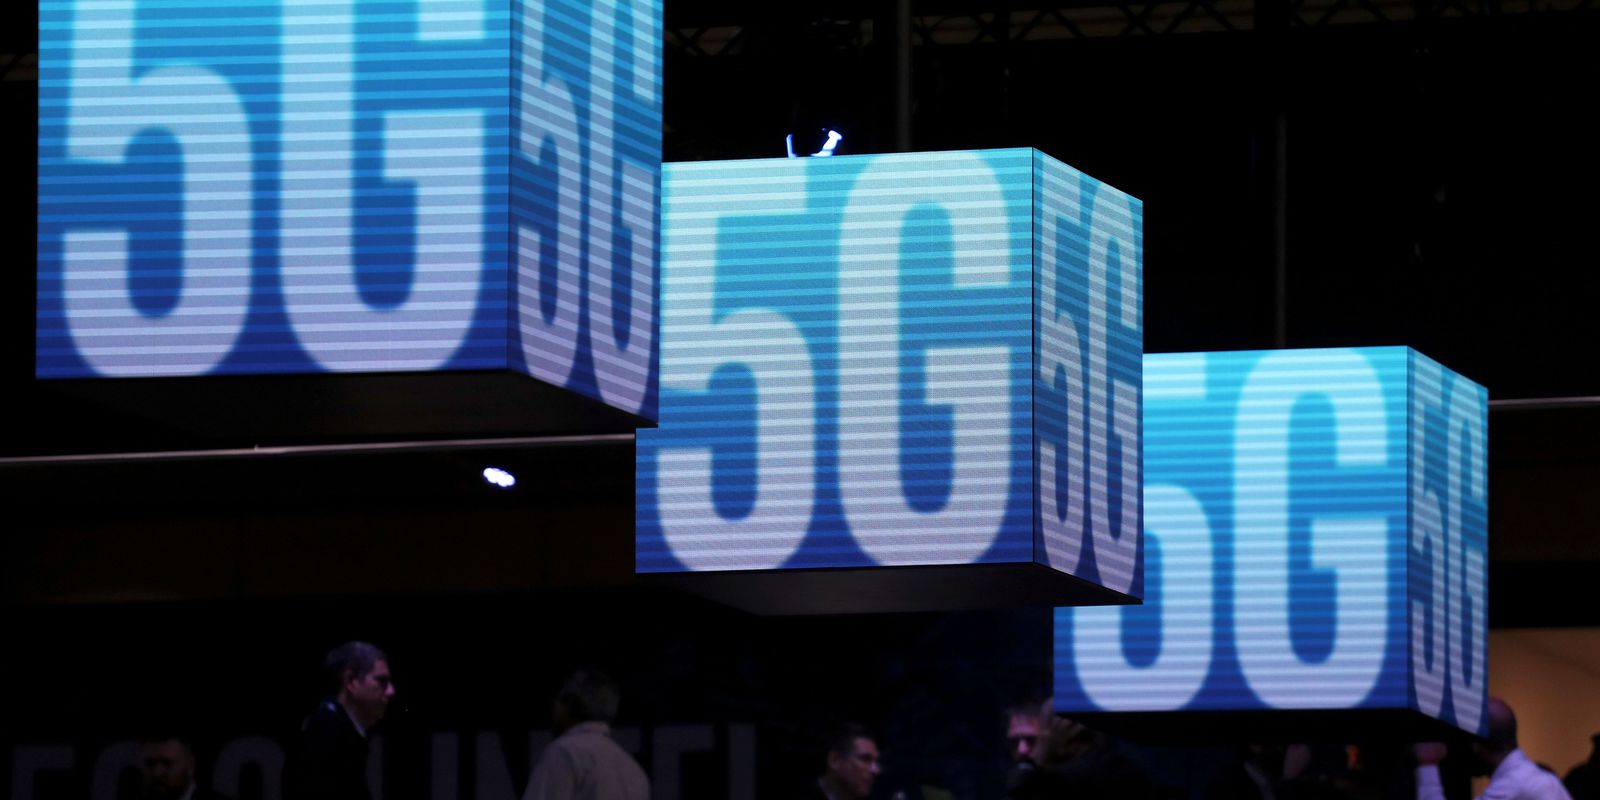 Ministry of Economy organizes event to analyze 5G in other countries